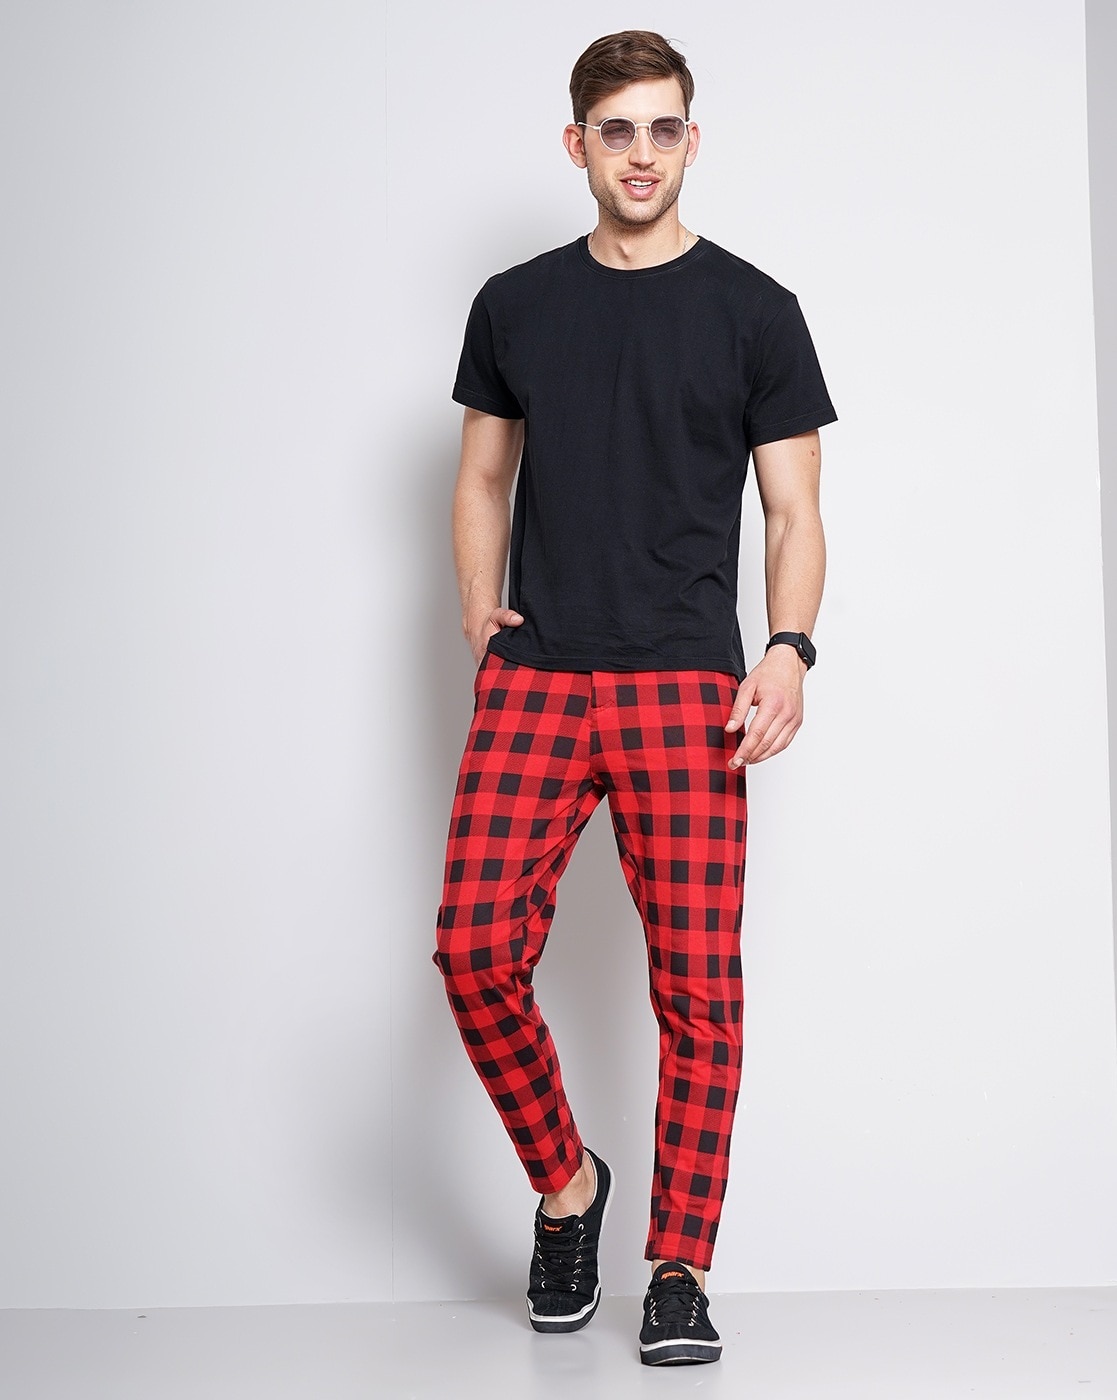 Twill trousers Skinny Fit  RedChecked  Men  HM IN